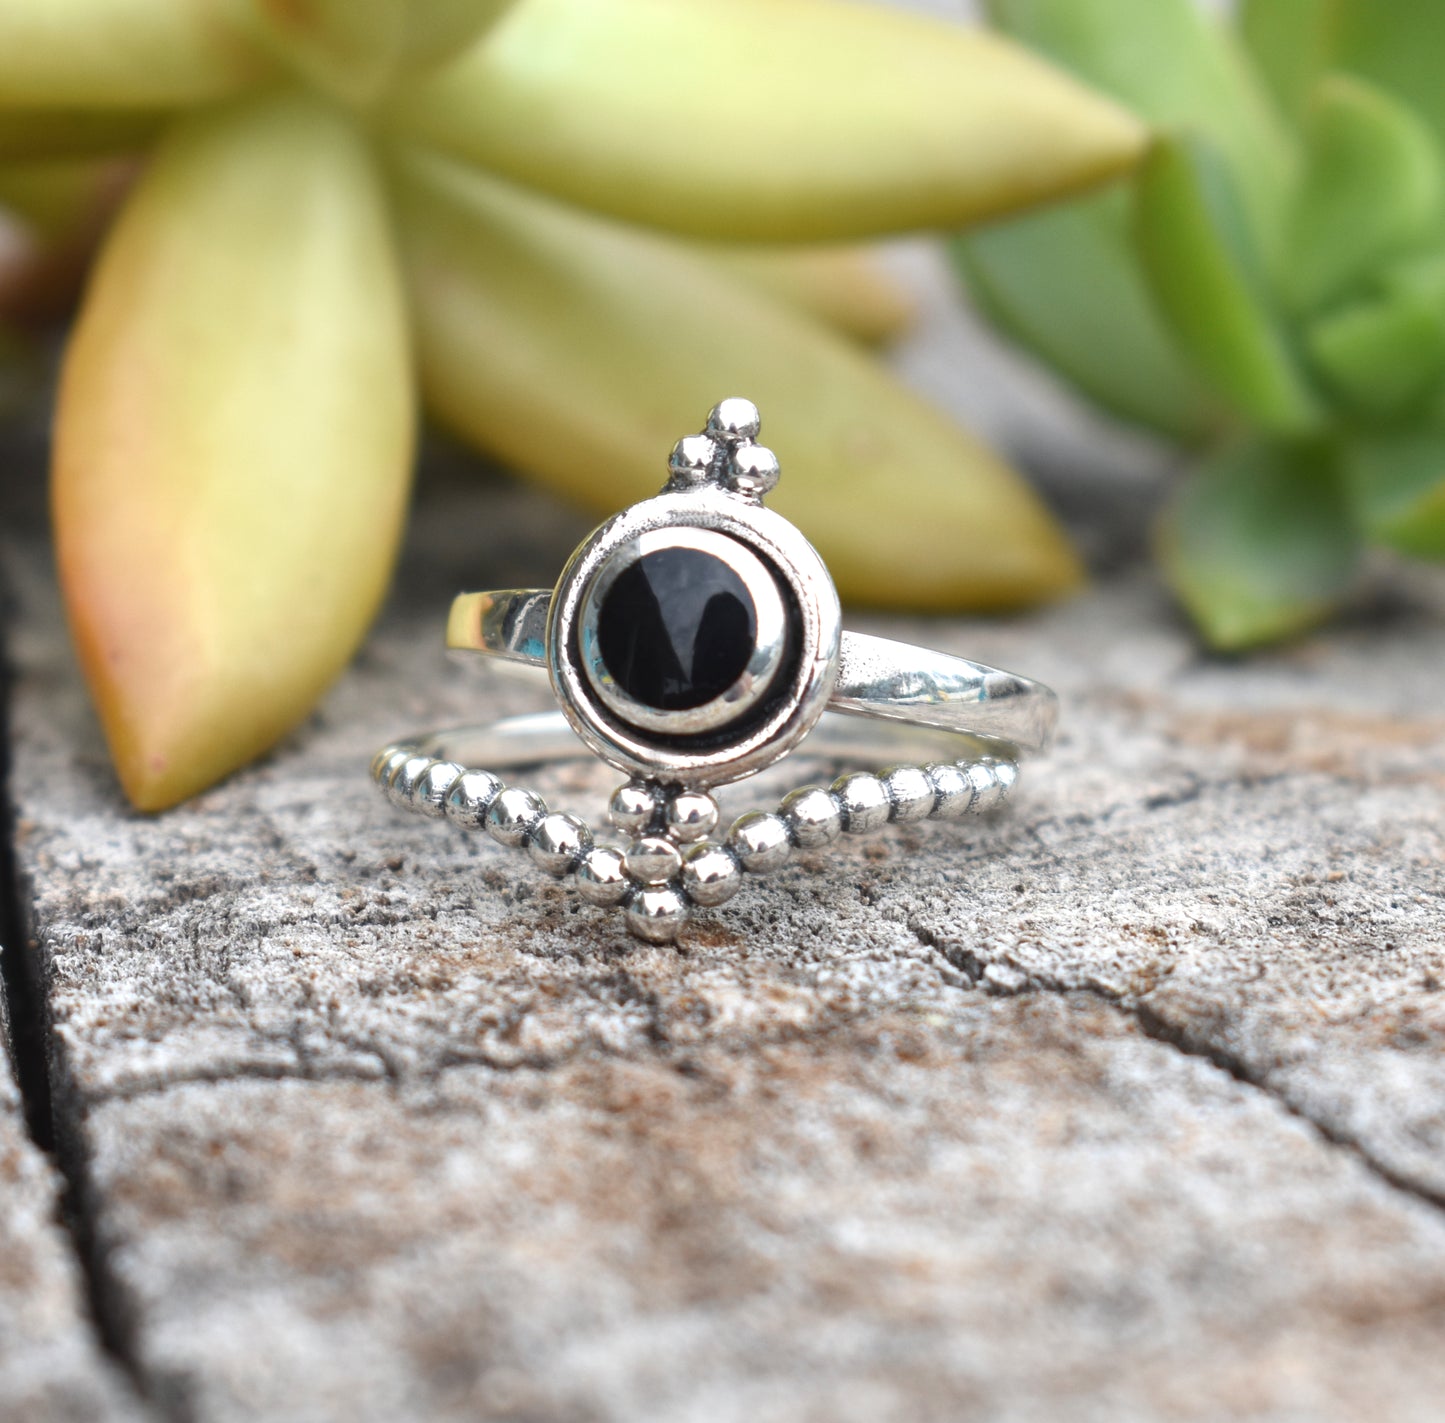 Bali Style Onyx Ring- Onyx Engagement Ring, Boho Ring-Sterling Silver Ring